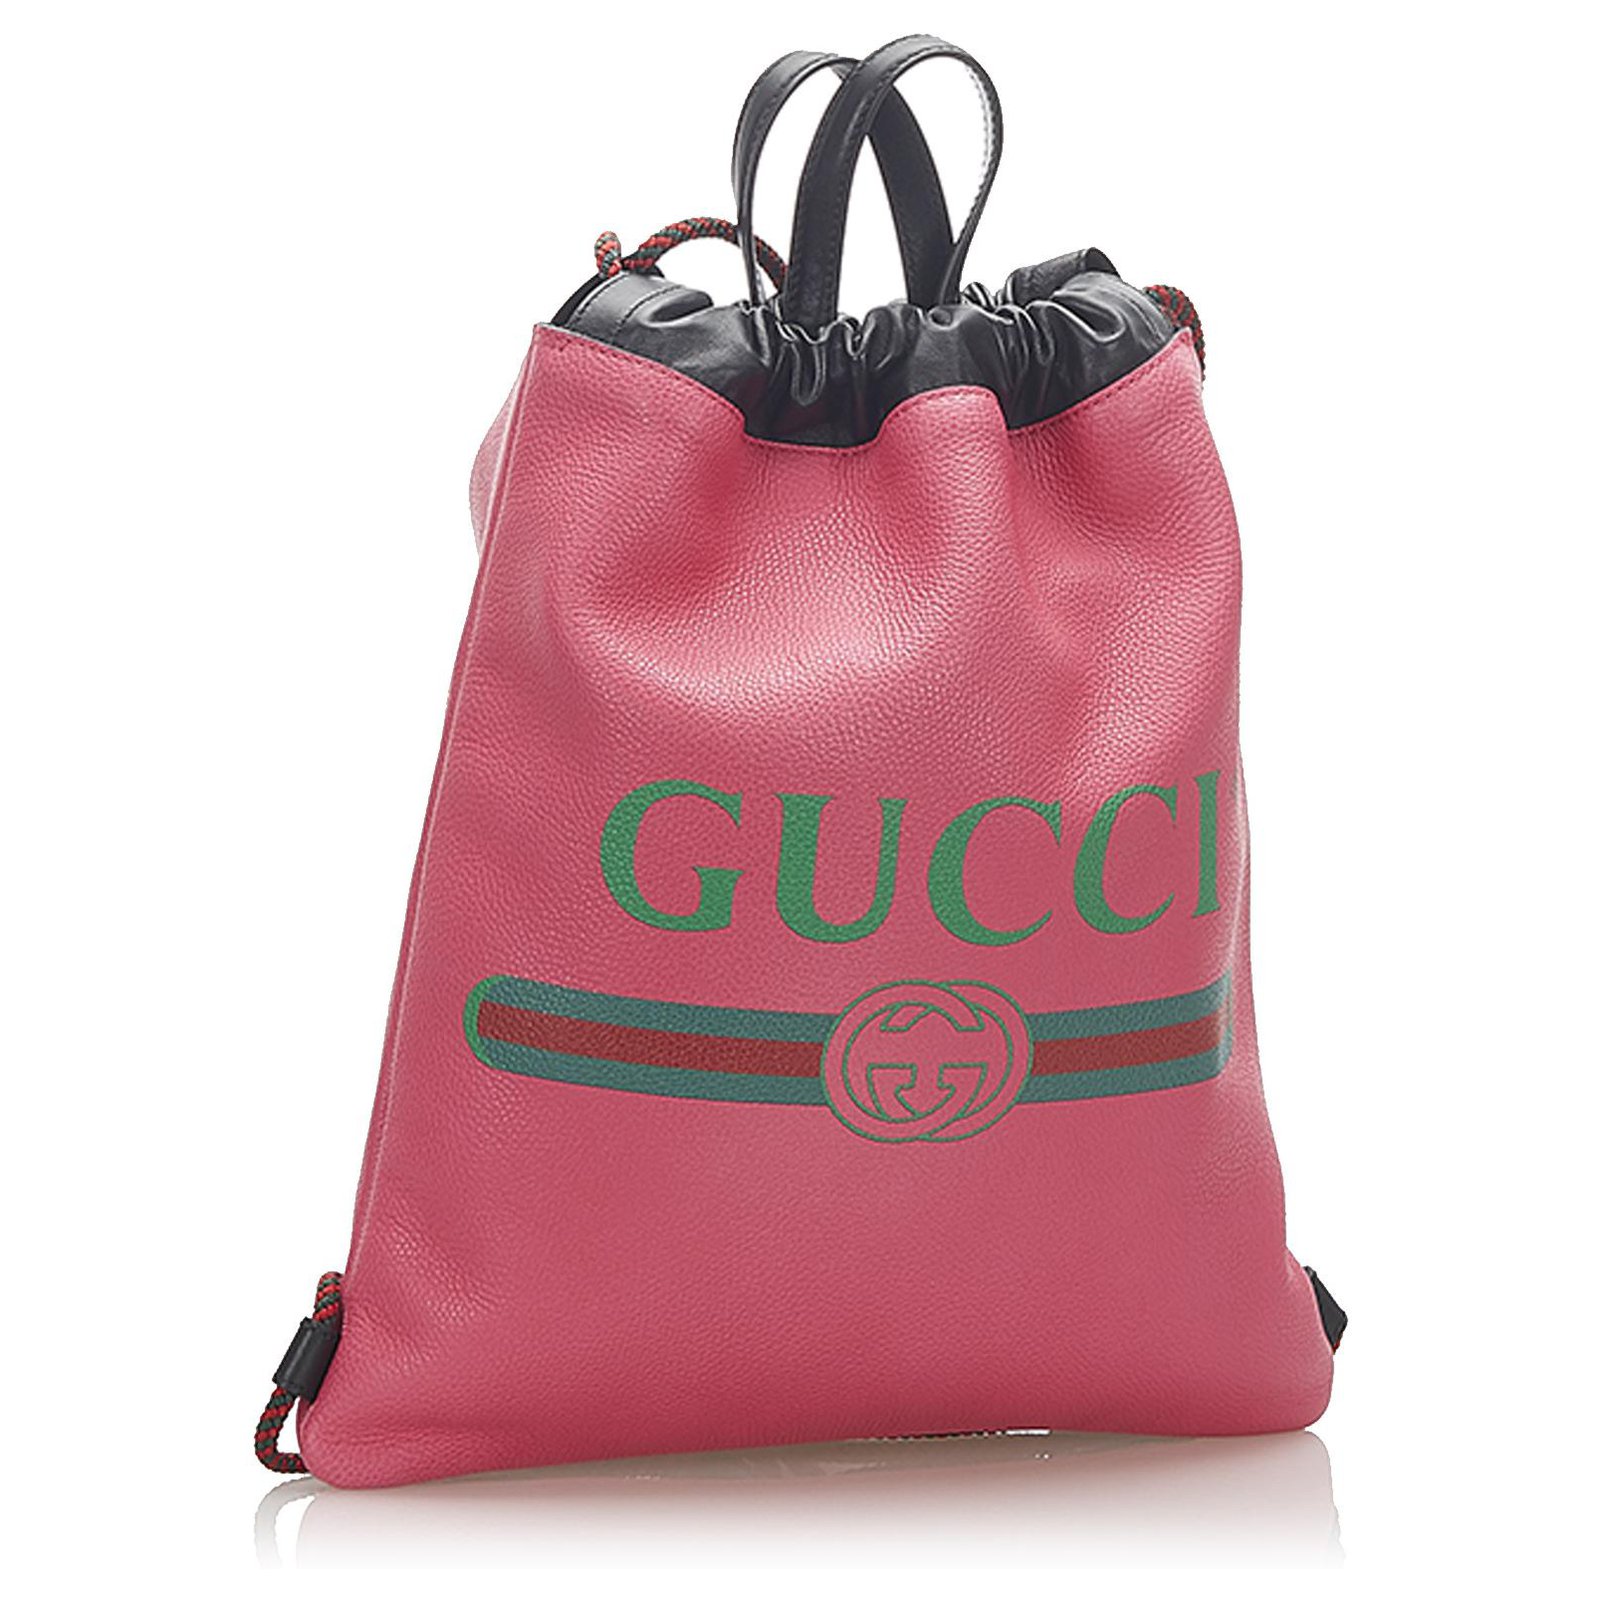 Gucci Pink Logo Drawstring Leather Backpack Multiple colors Pony